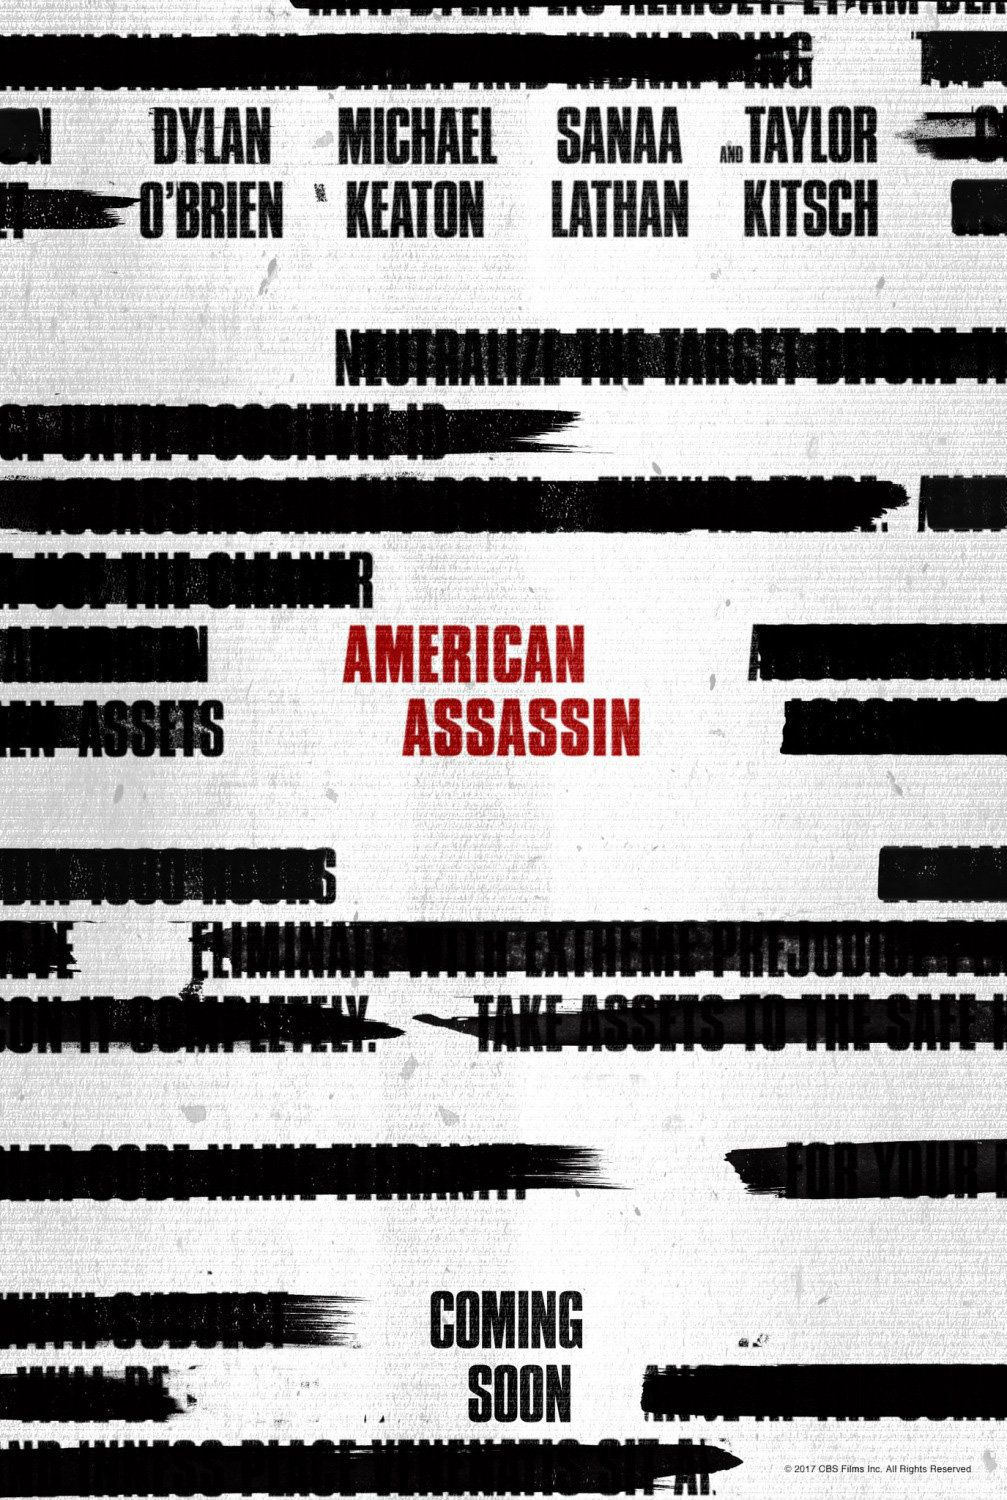 American Assassin Trailer: Dylan O’Brien is a Deadly Spy